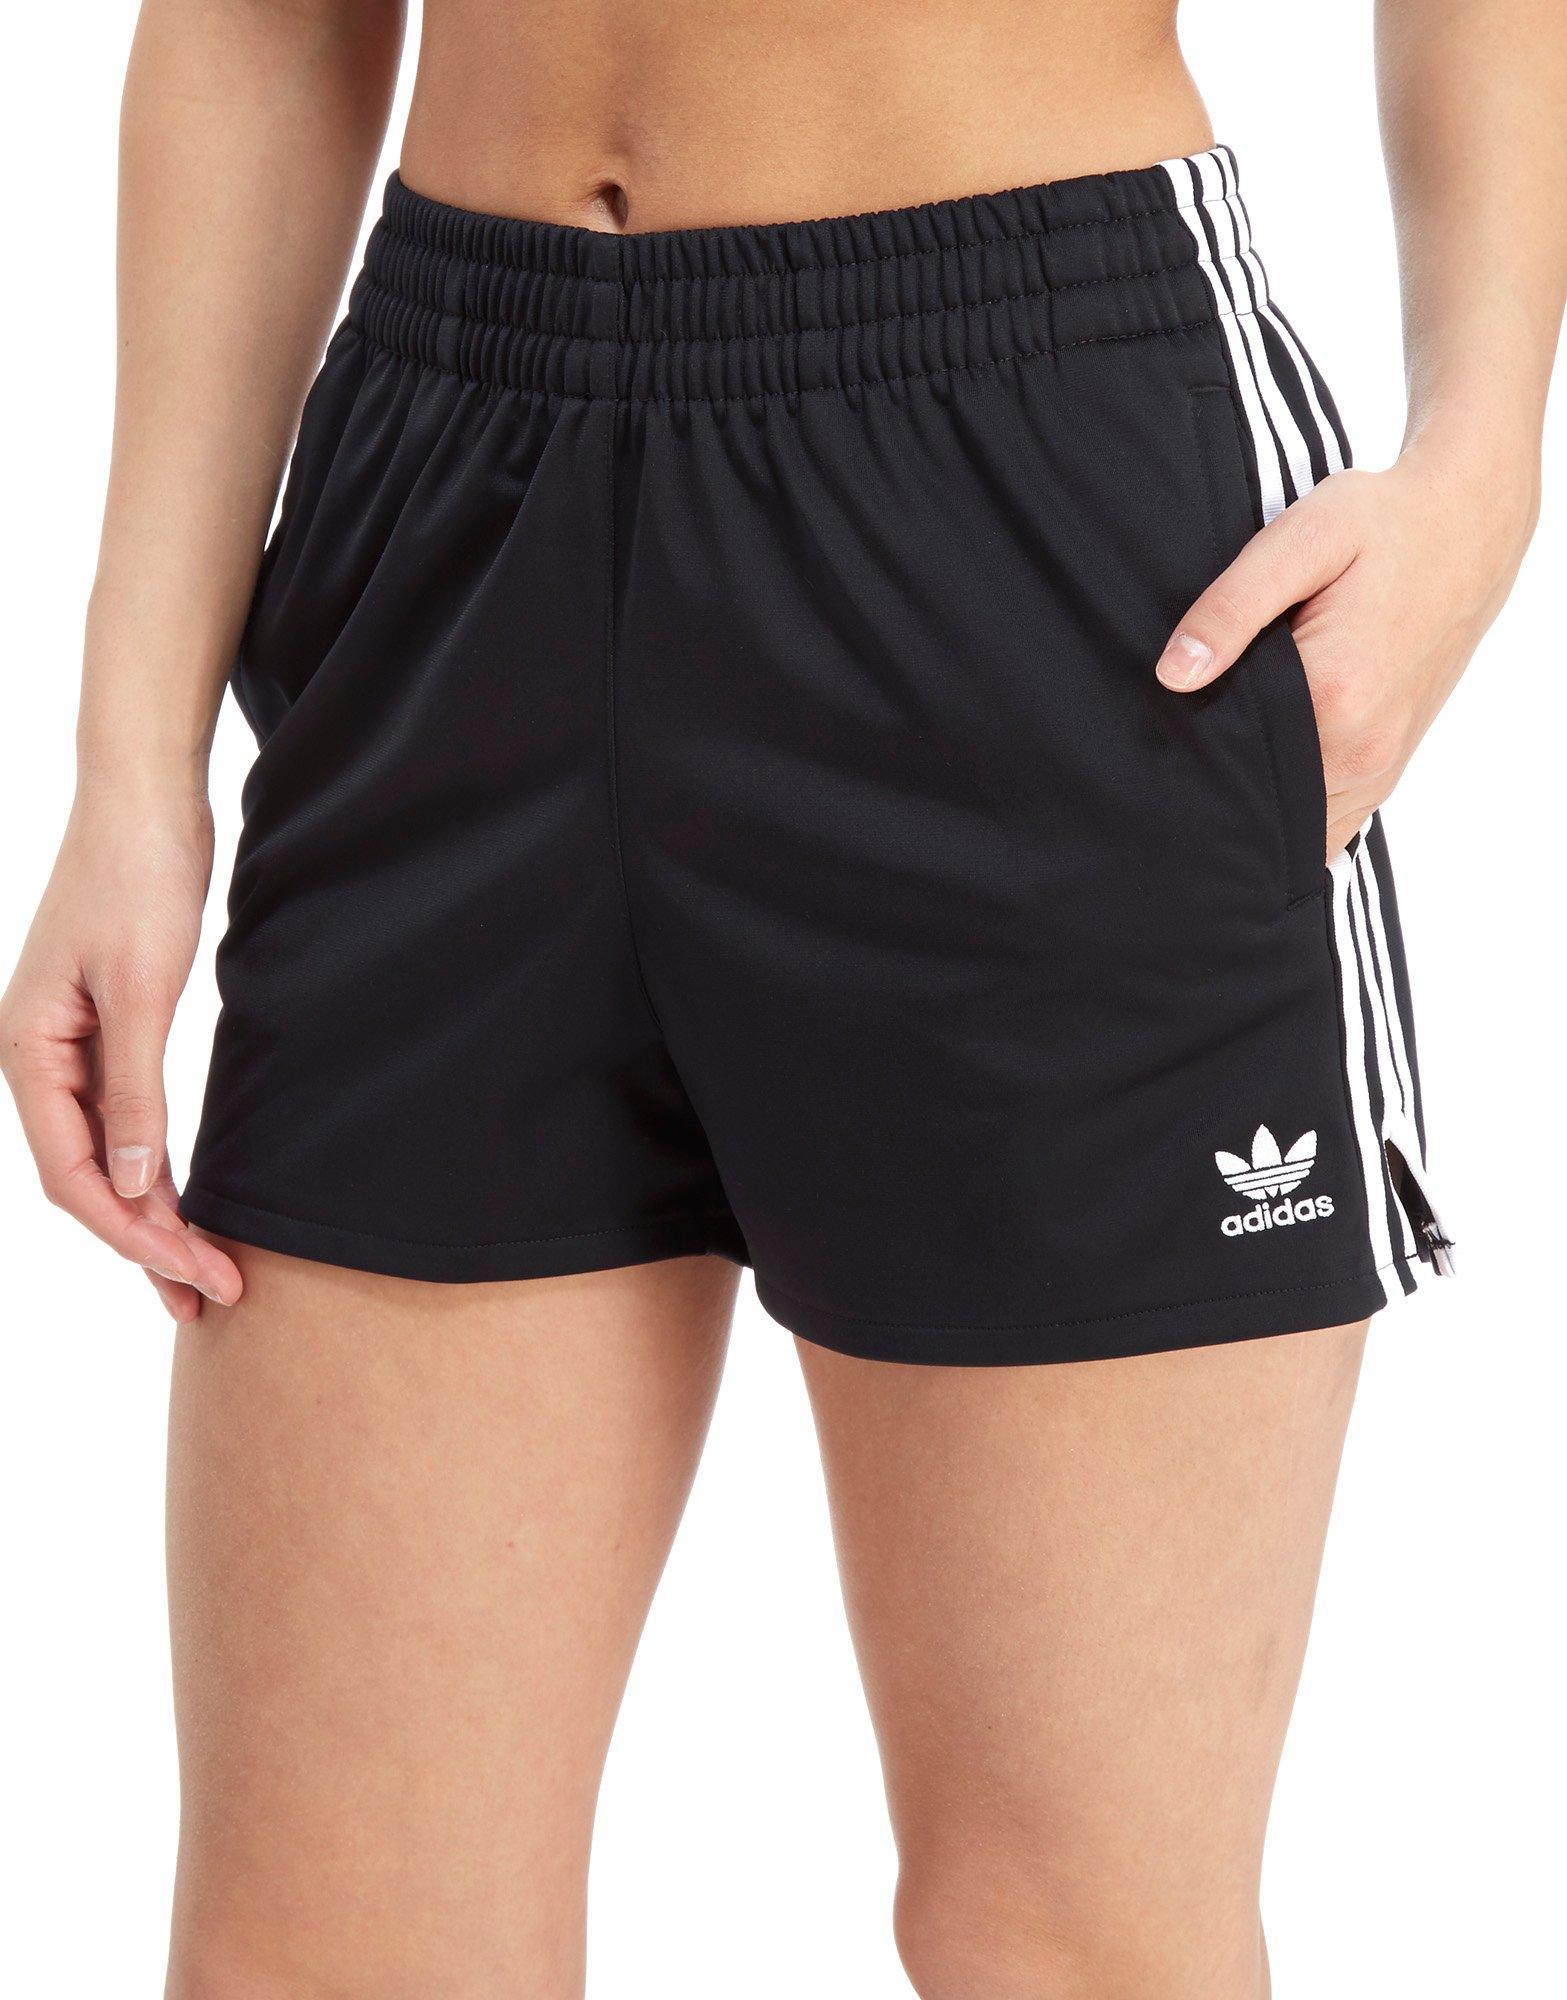 adidas Originals Synthetic 3-stripes Poly Shorts in Black - Lyst